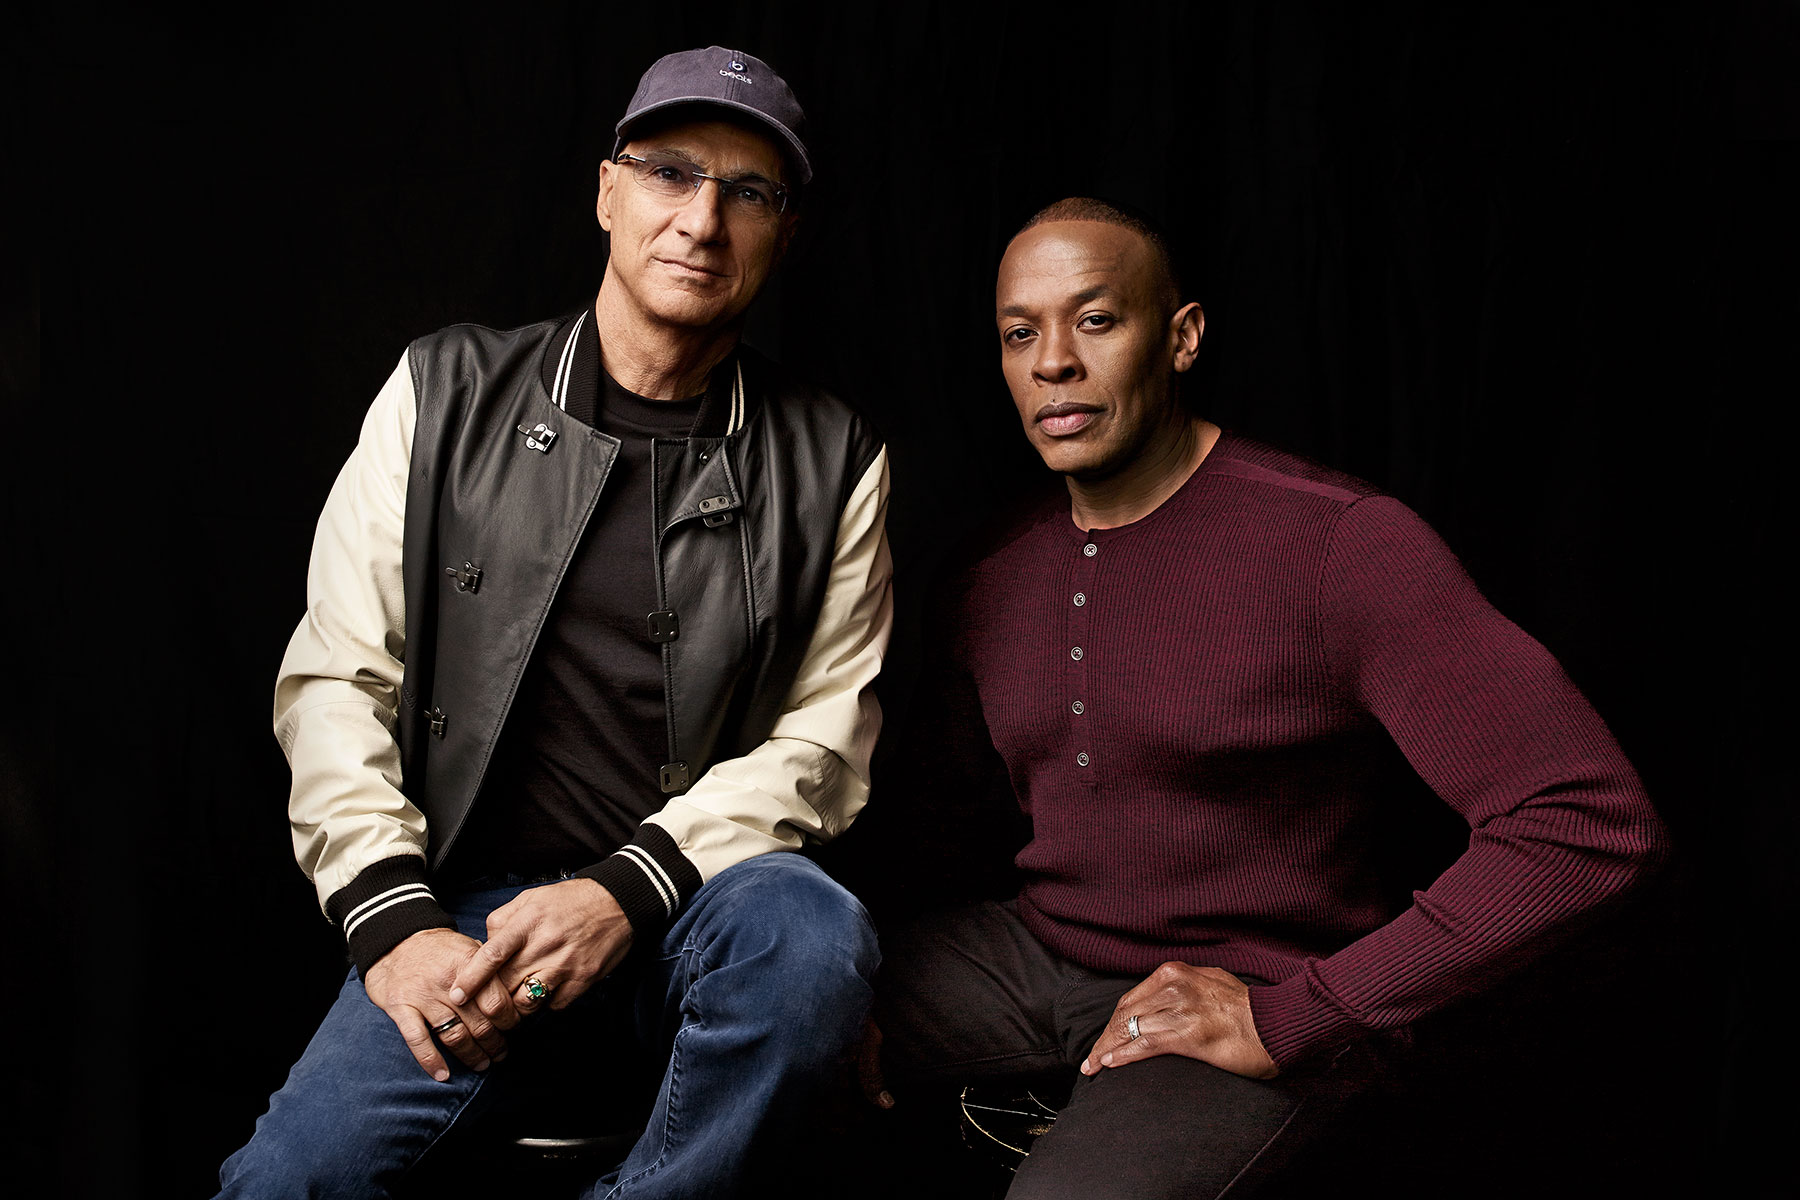 Jimmy Iovine and Dr. Dre (Art Streiber for TIME)